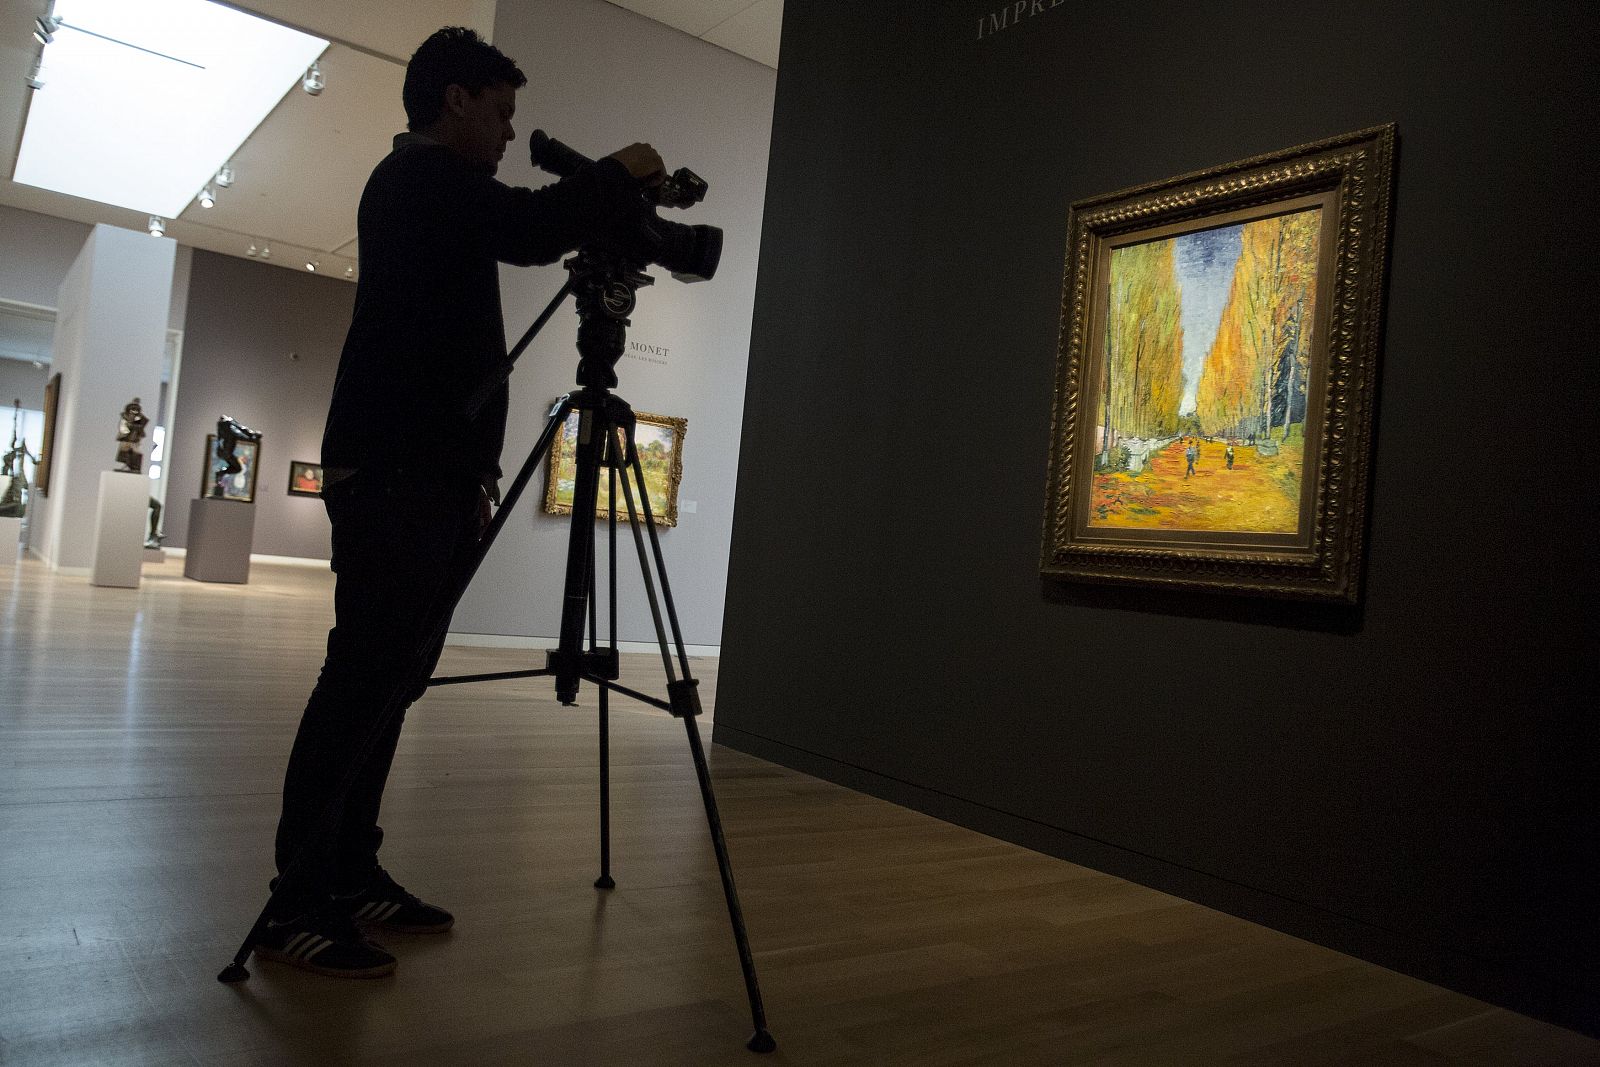 A person films Van Gogh's "L'AllÃ©e des Alyscamps", ahead of a preview event to Sotheby's upcoming evening's of impressionist, modern and contemporary art in the Manhattan borough of New York City